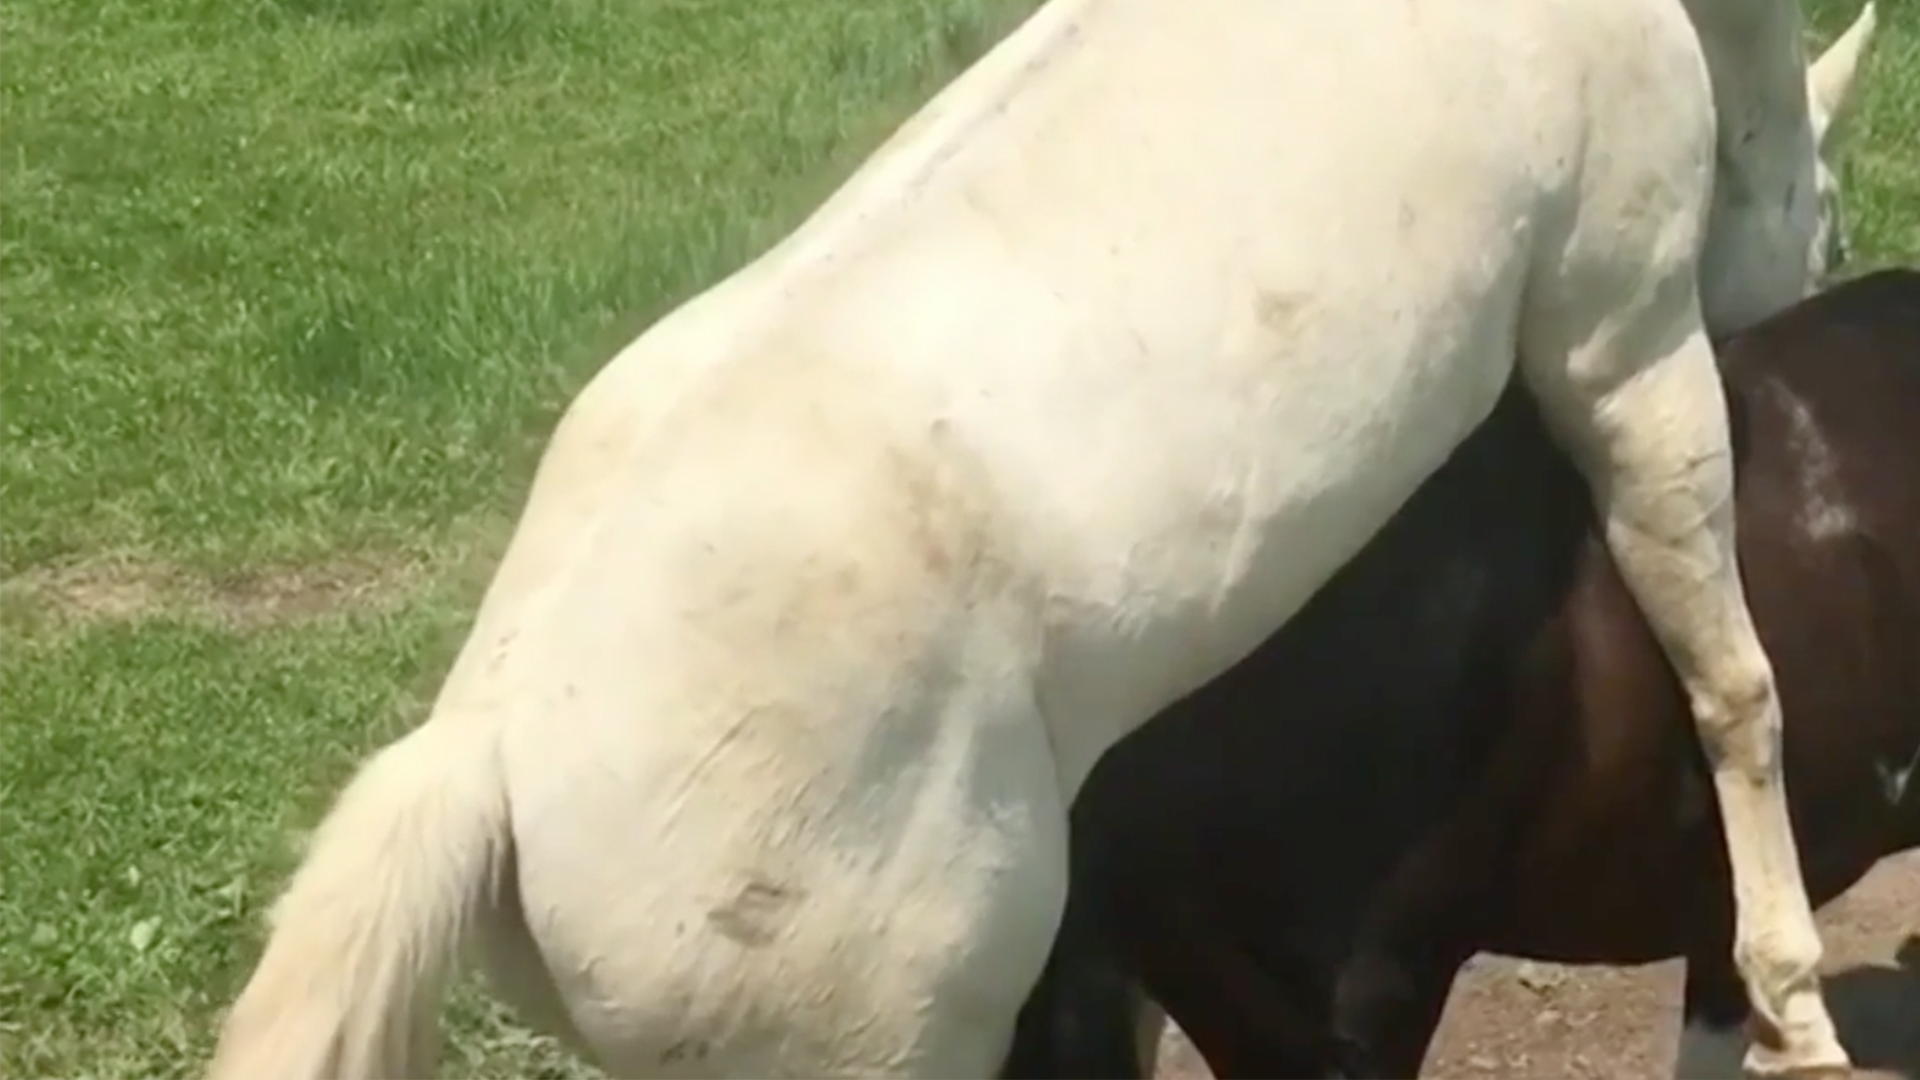 Dark-haired Chick Gives This Horse A Great Handjob